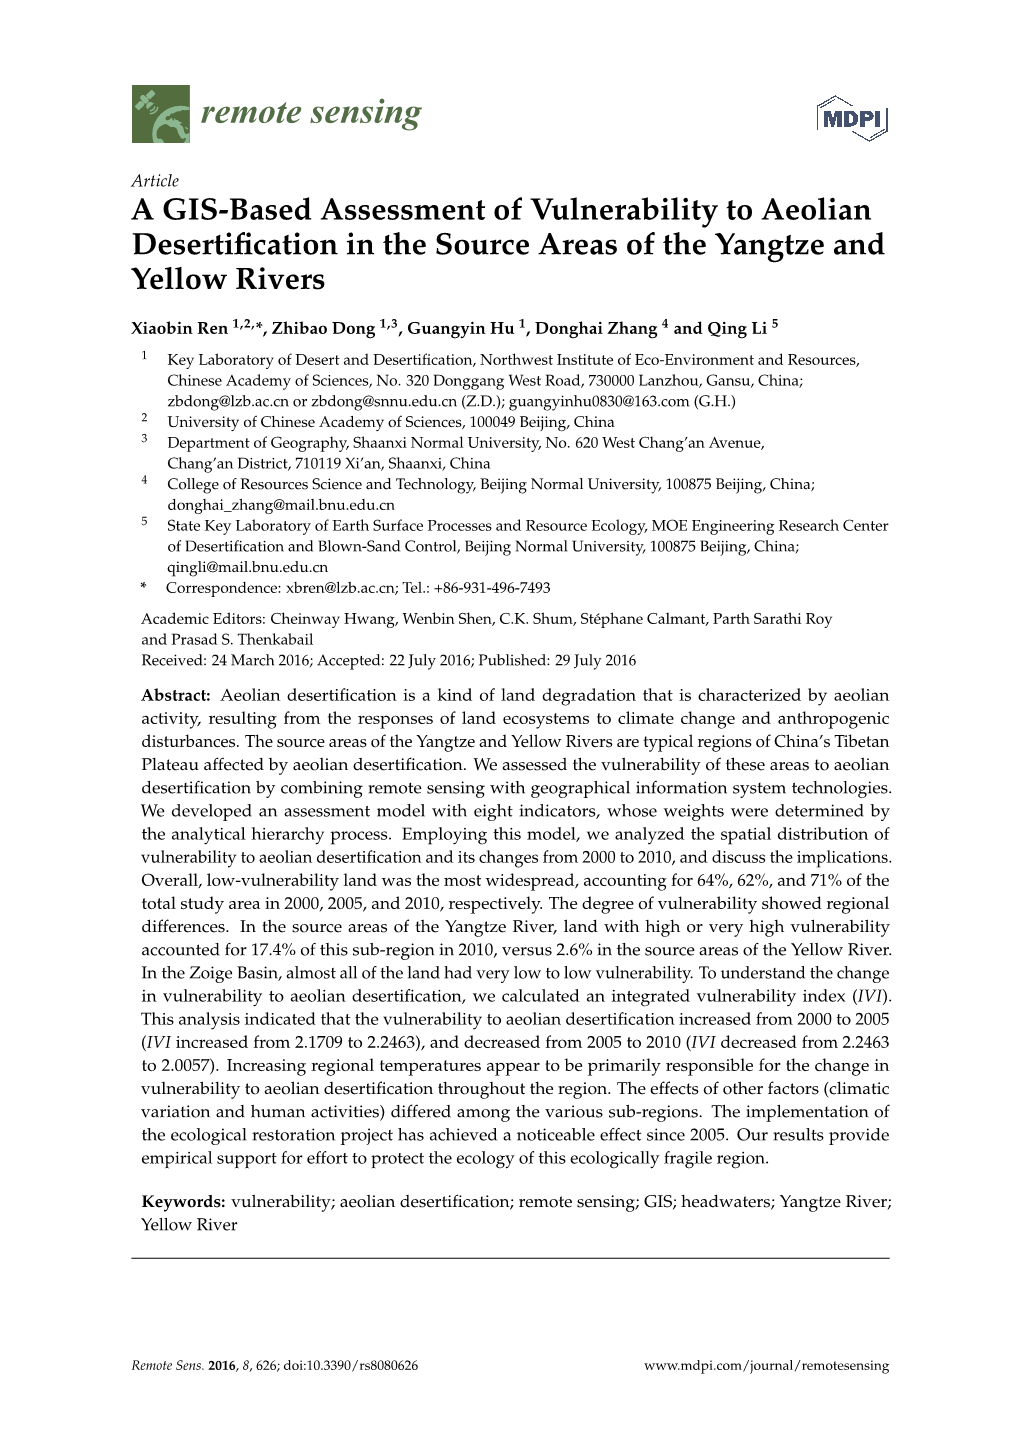 A GIS-Based Assessment of Vulnerability to Aeolian Desertification in the Source Areas of the Yangtze and Yellow Rivers